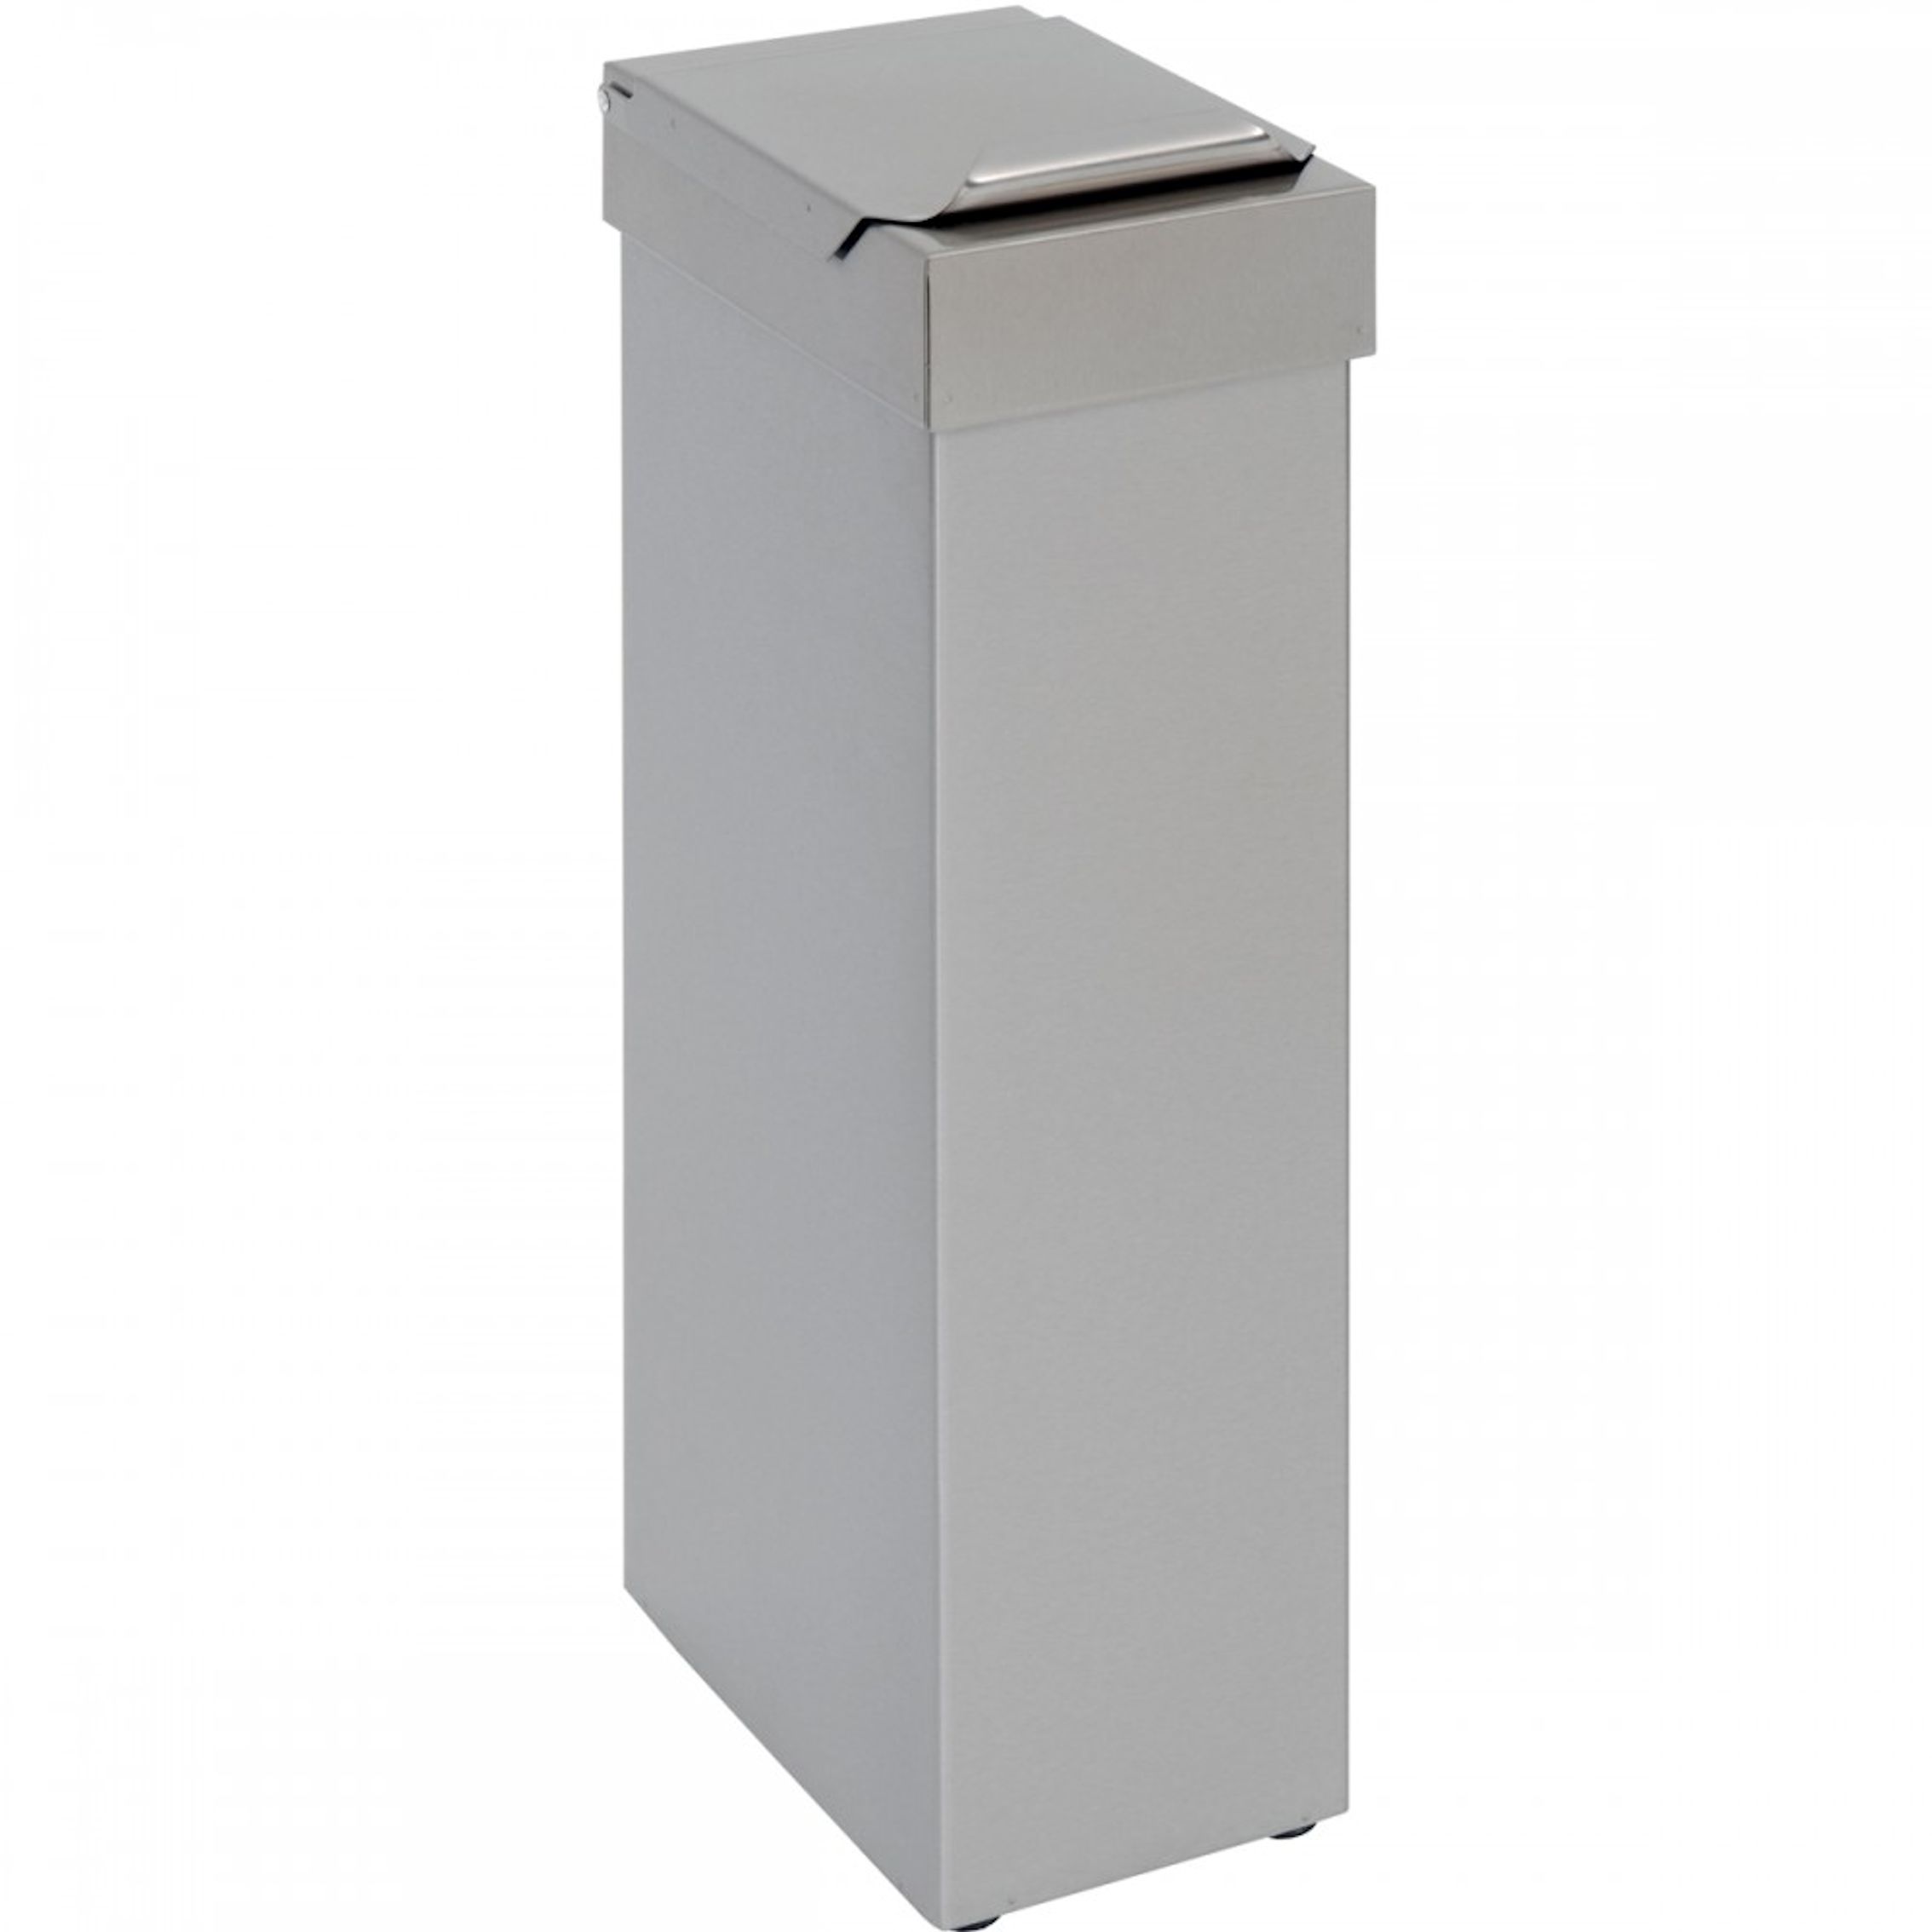 Dolphin Stainless Steel Sanitary Bin 20 Litres BC980